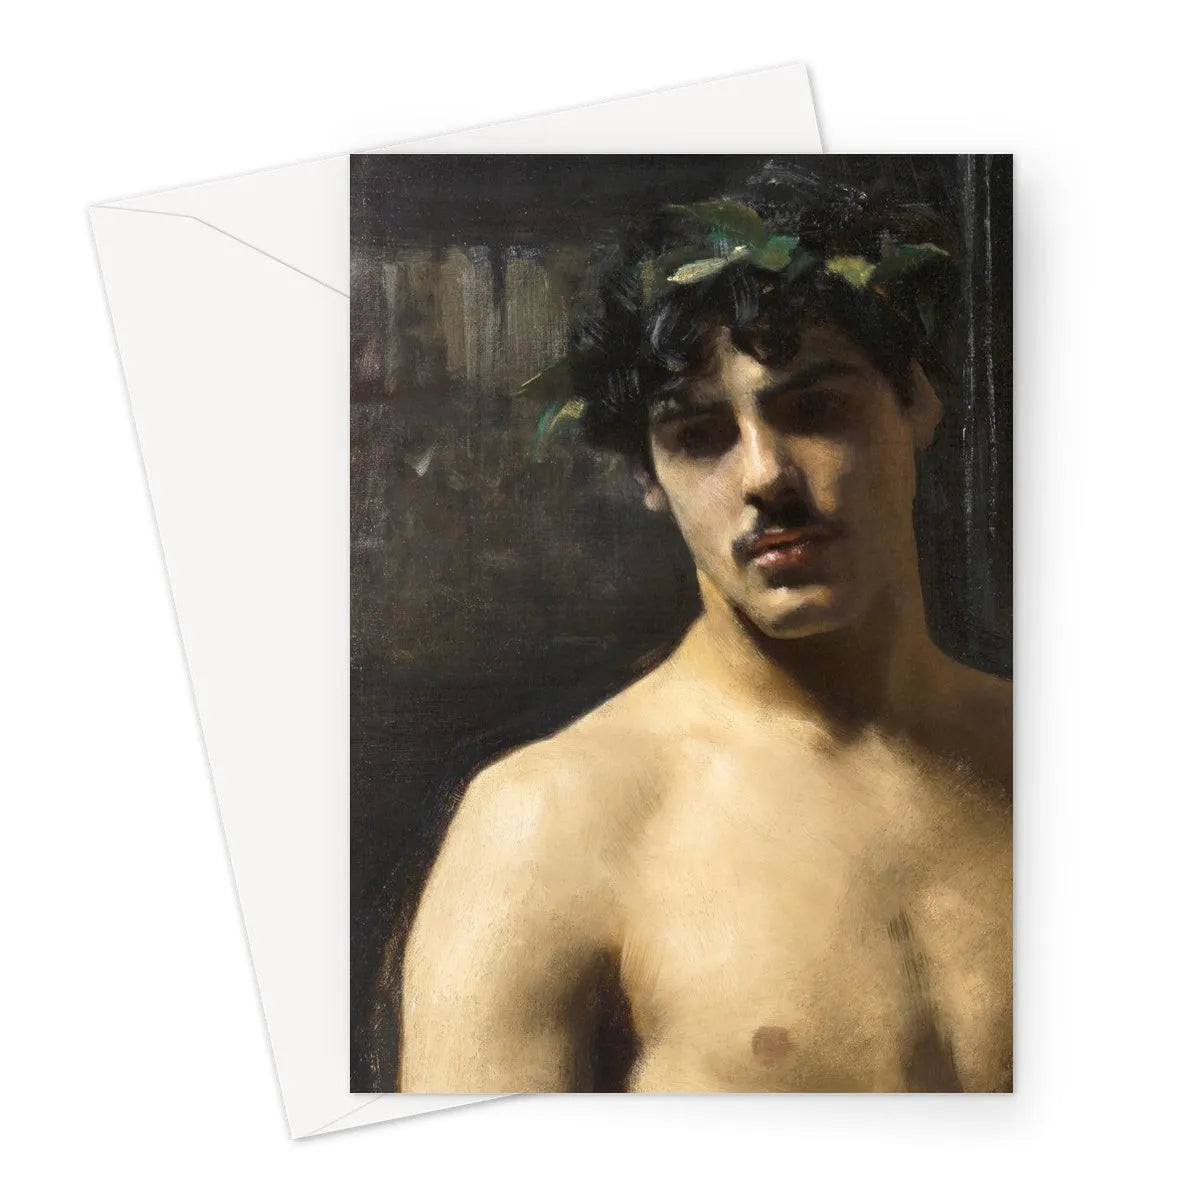 Man Wearing Laurels By John Singer Sargent Greeting Card - A5 Portrait / 1 Card - Notebooks & Notepads - Aesthetic Art